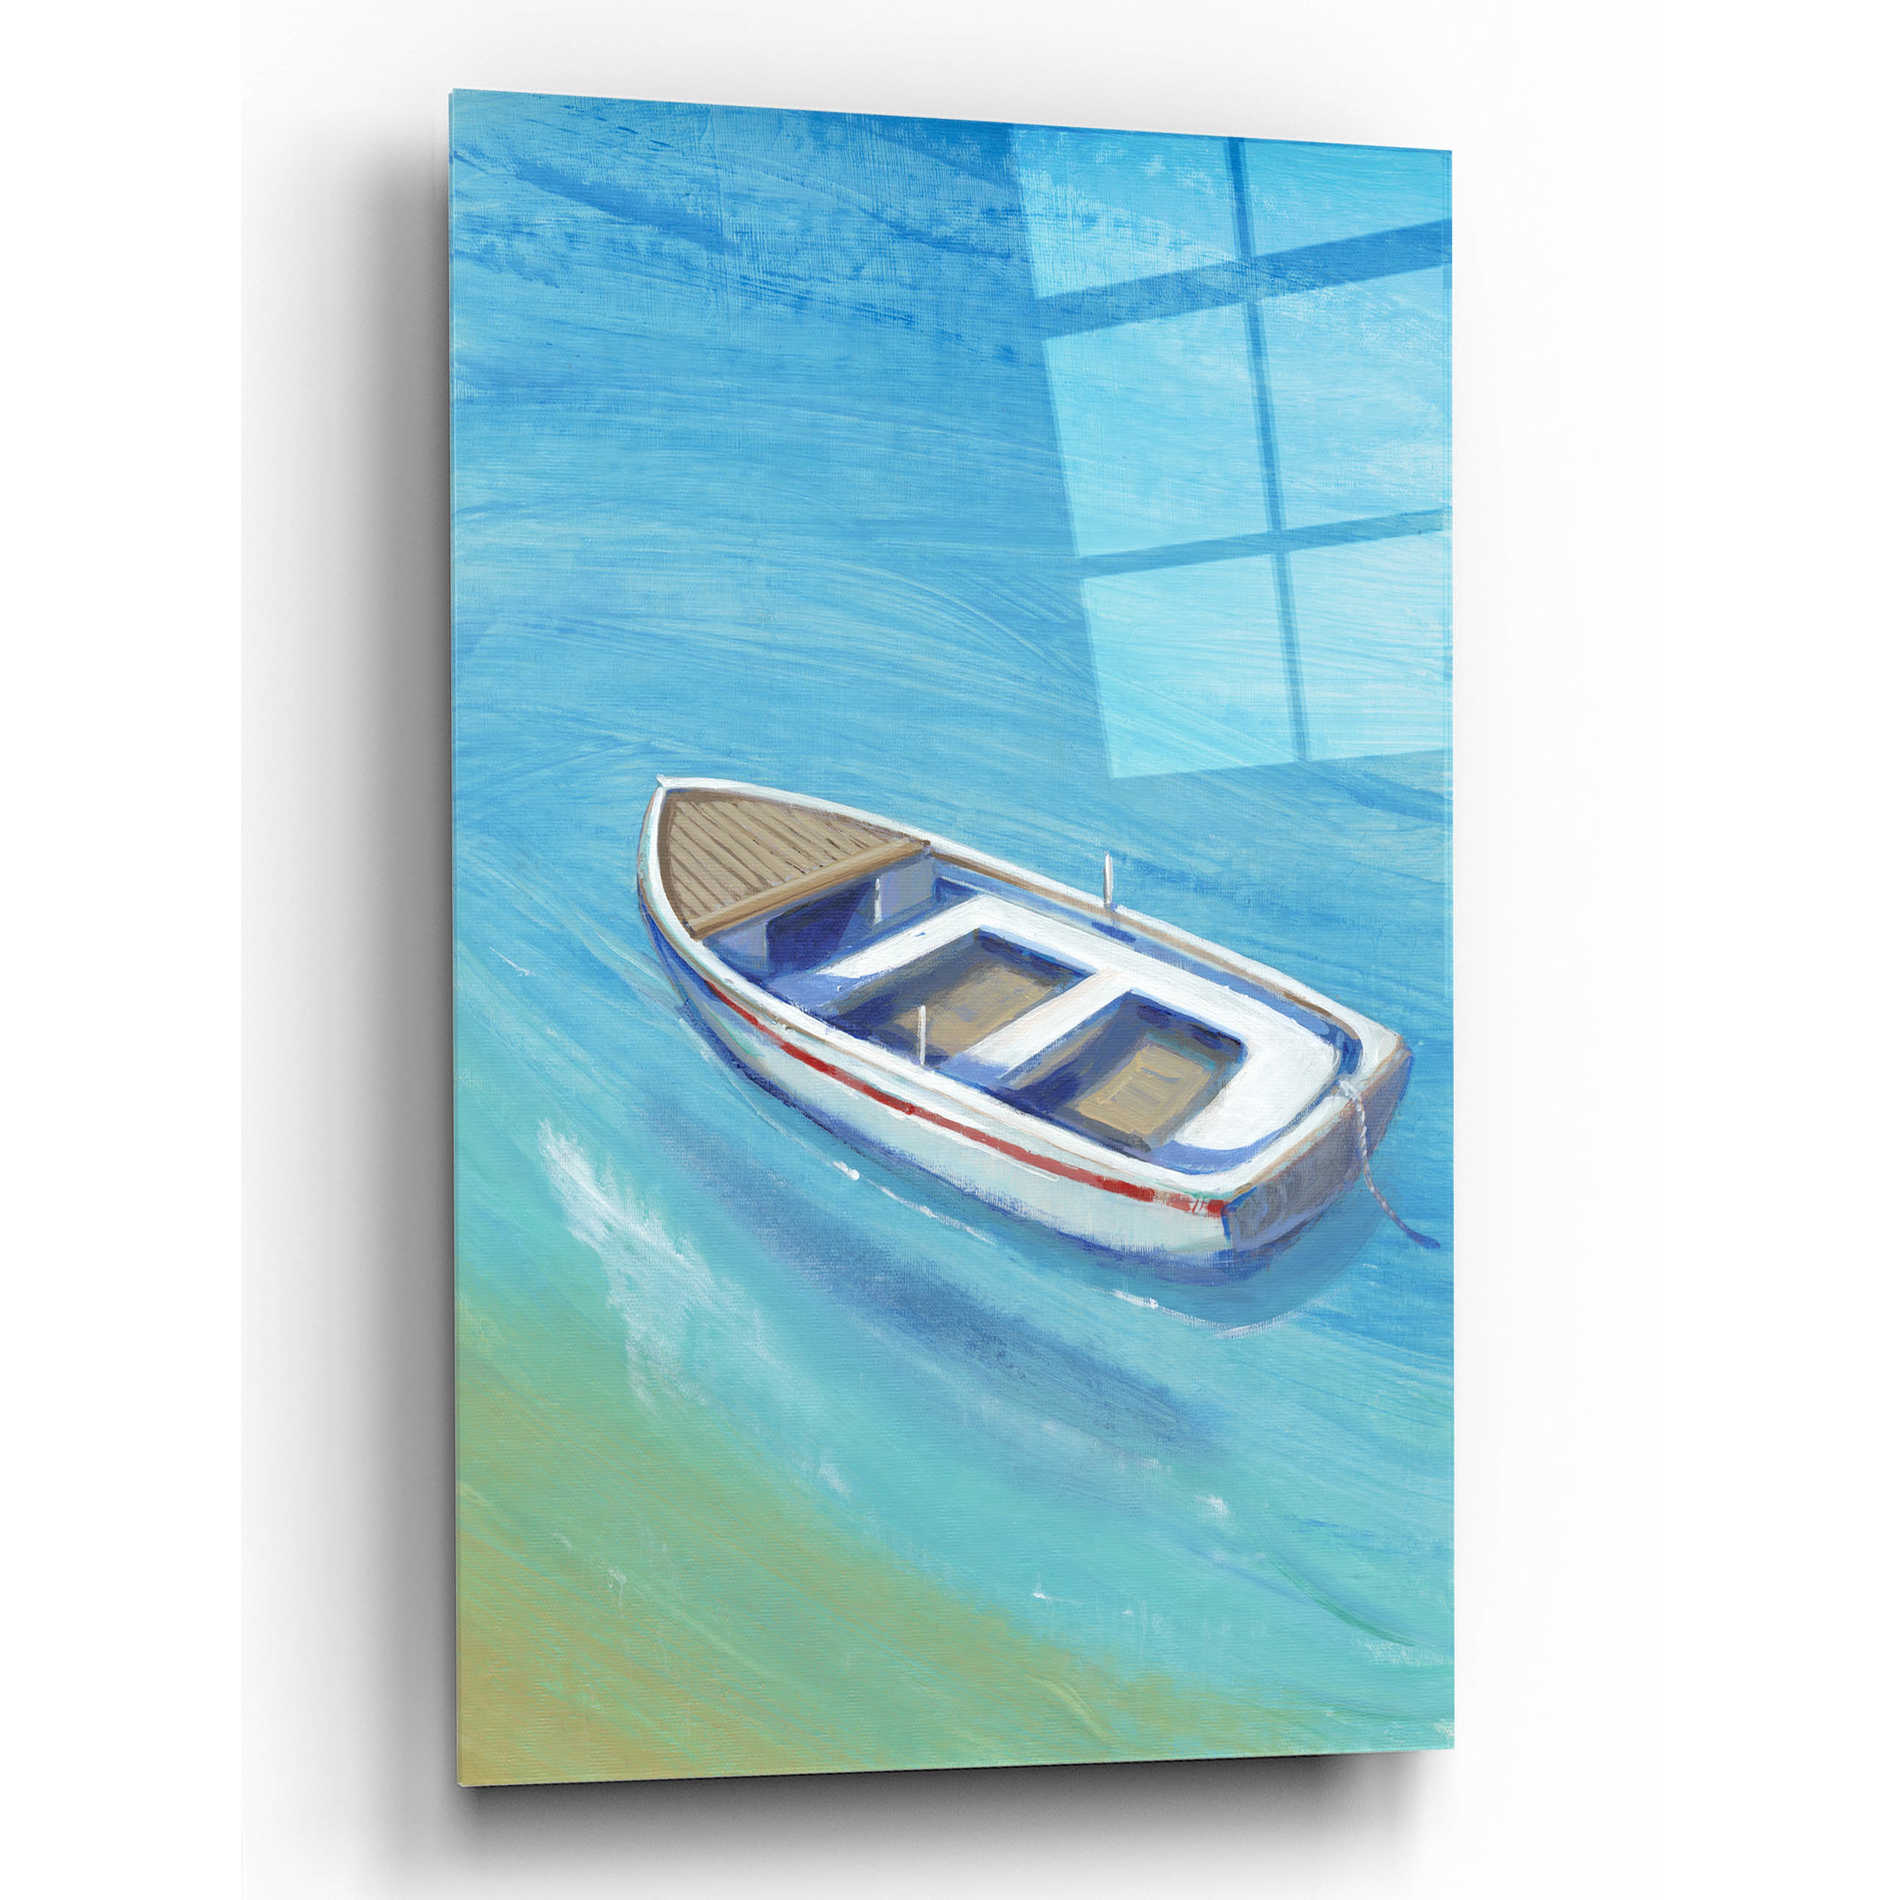 Epic Art 'Anchored Dingy I' by Tim O'Toole, Acrylic Glass Wall Art,12x16